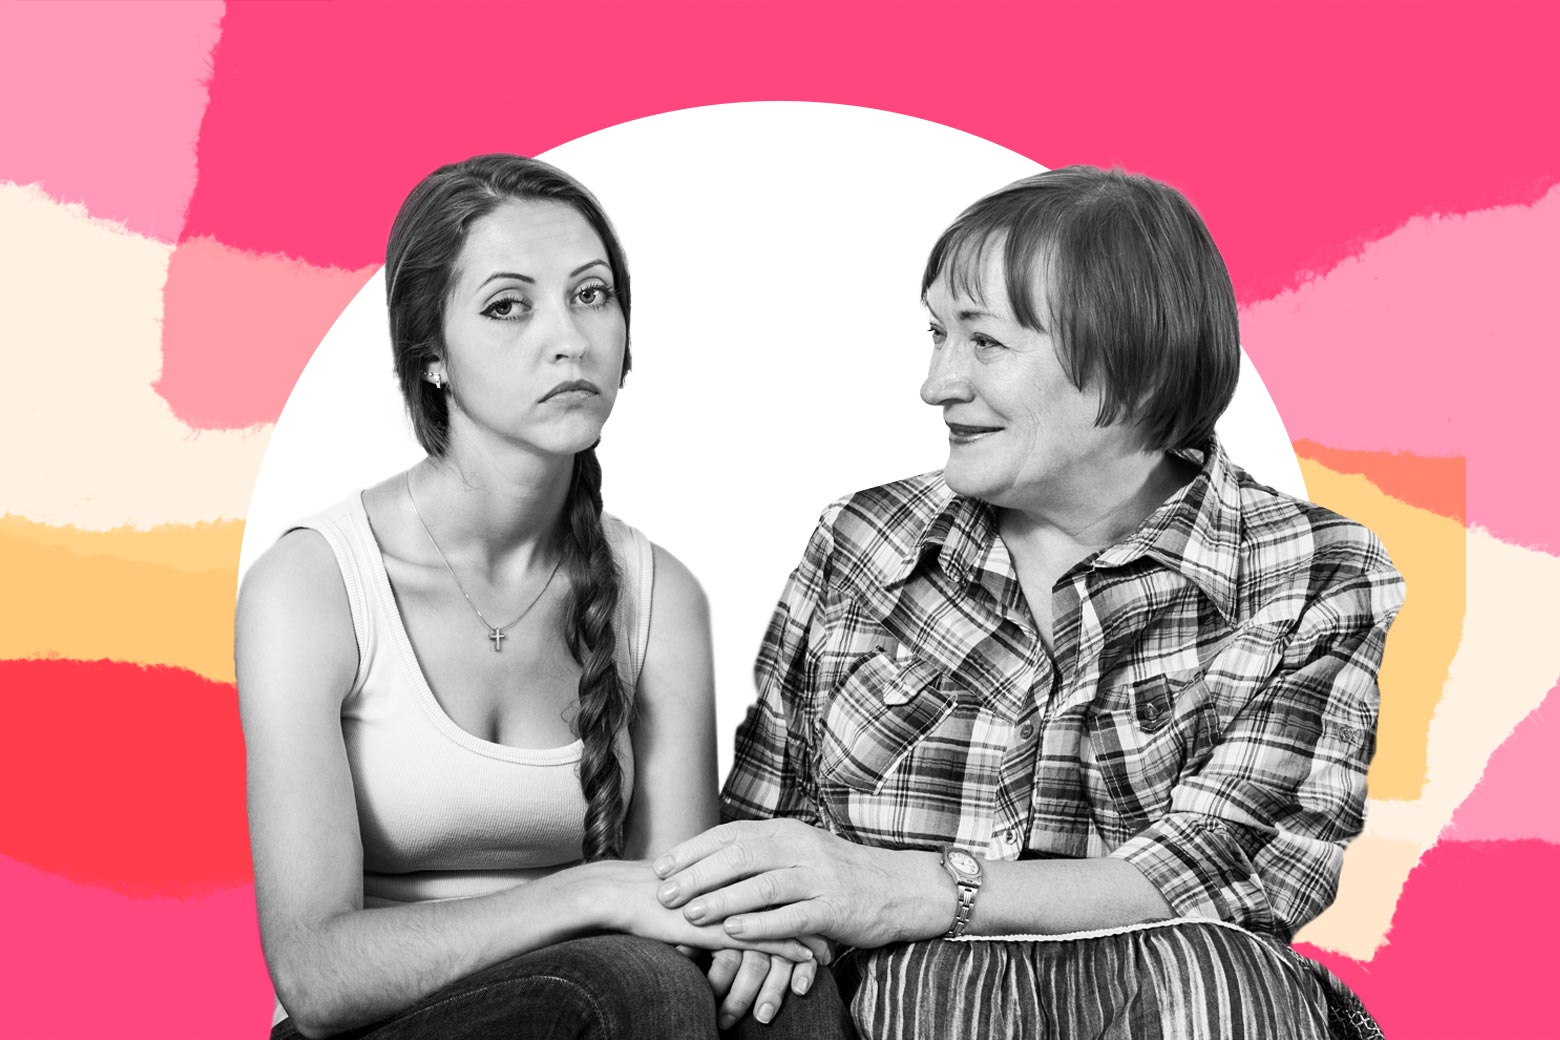 In-law advice: I know the truth about my mother-in-law. She has no idea. - Slate